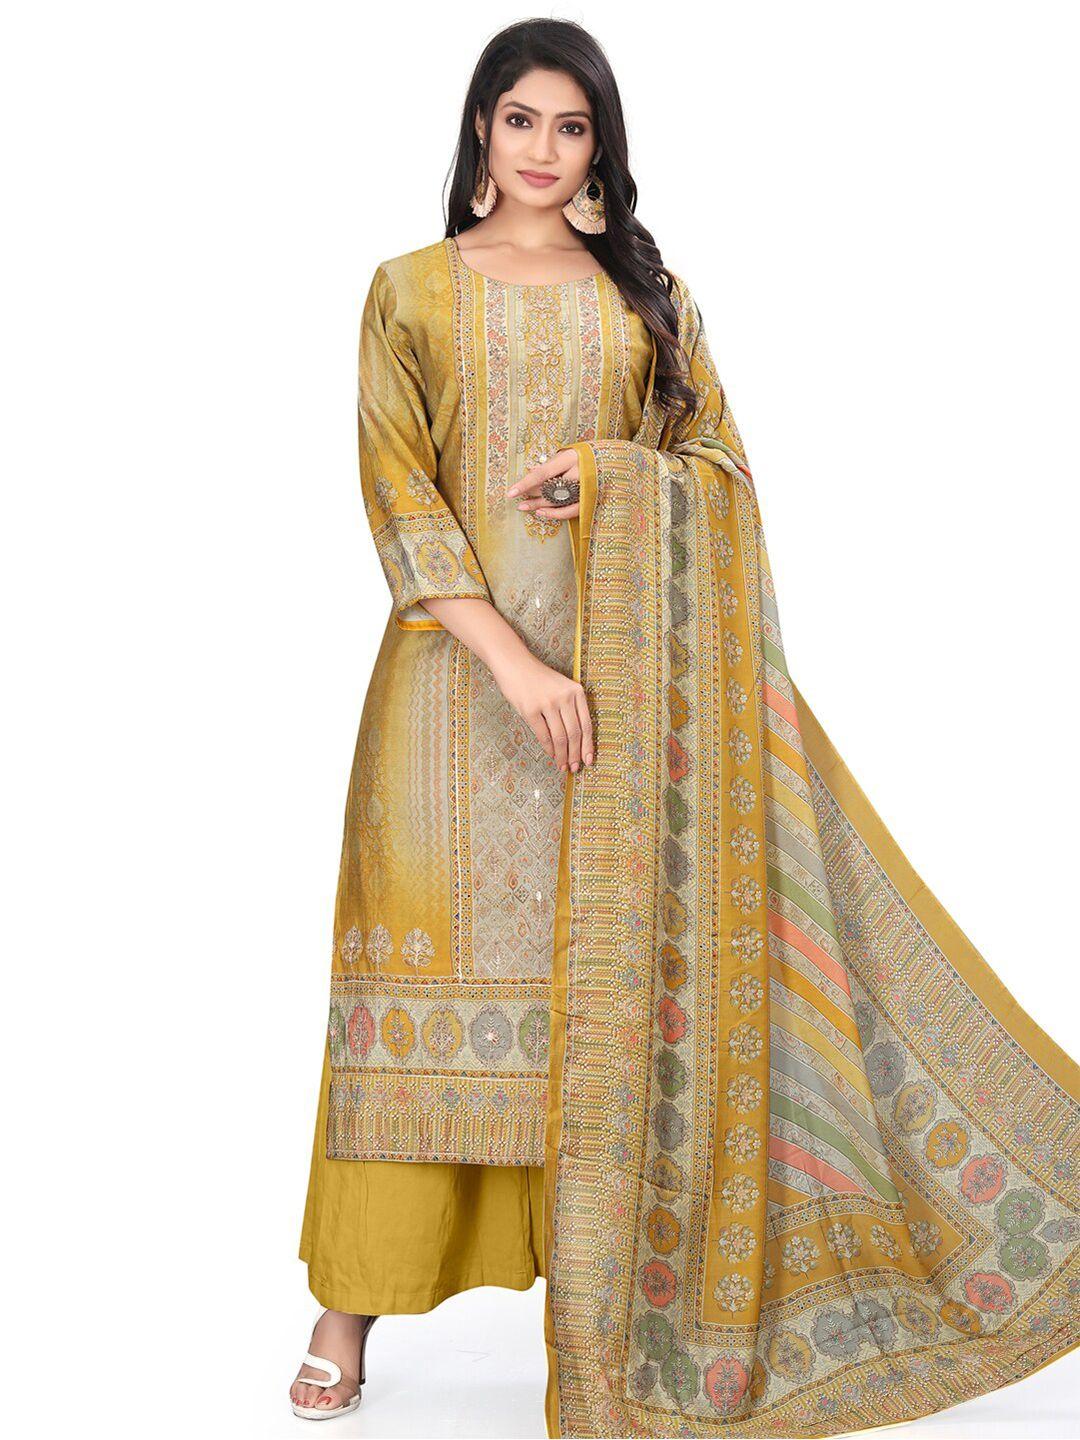 stylee-lifestyle-ethnic-motifs-printed-unstitched-dress-material